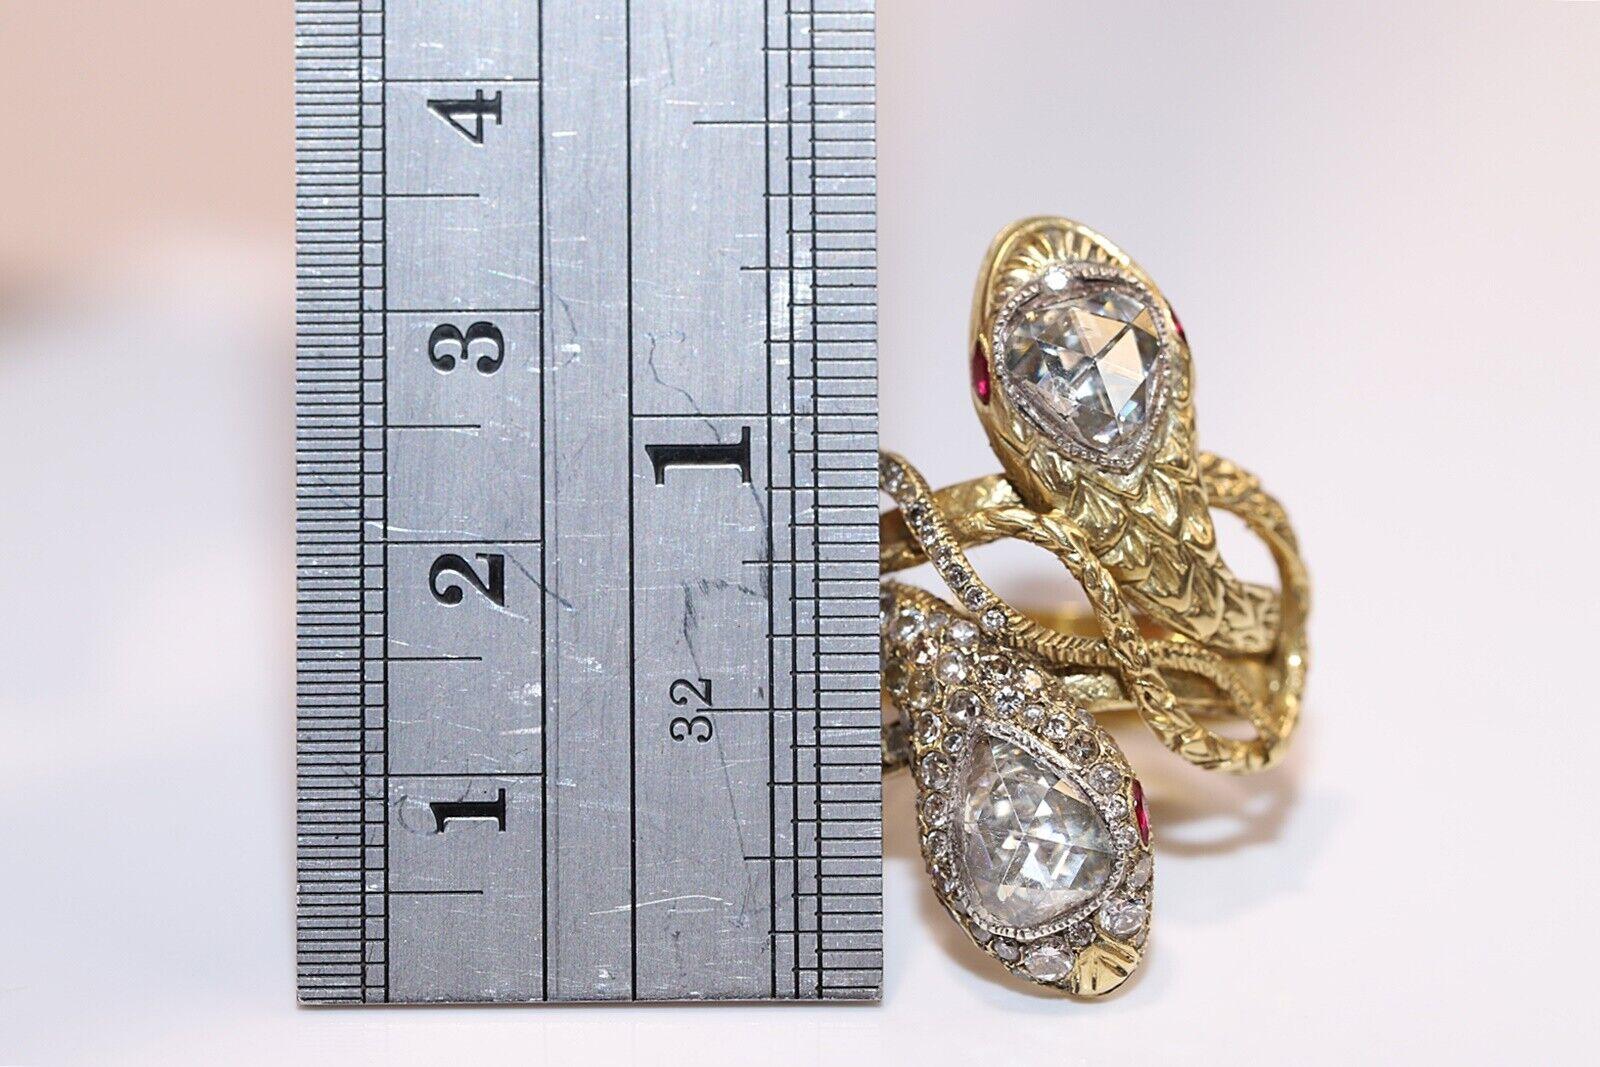 In very good condition.
Our own production.
Total weight is  14.9 grams solid 18K gold...
The Snake head Diamonds  have rose cut and are totally 1.34 carat...
The Snake heads Diamonds are G-H color and have vs-s1-s2 clarity.
Side diamonds are 